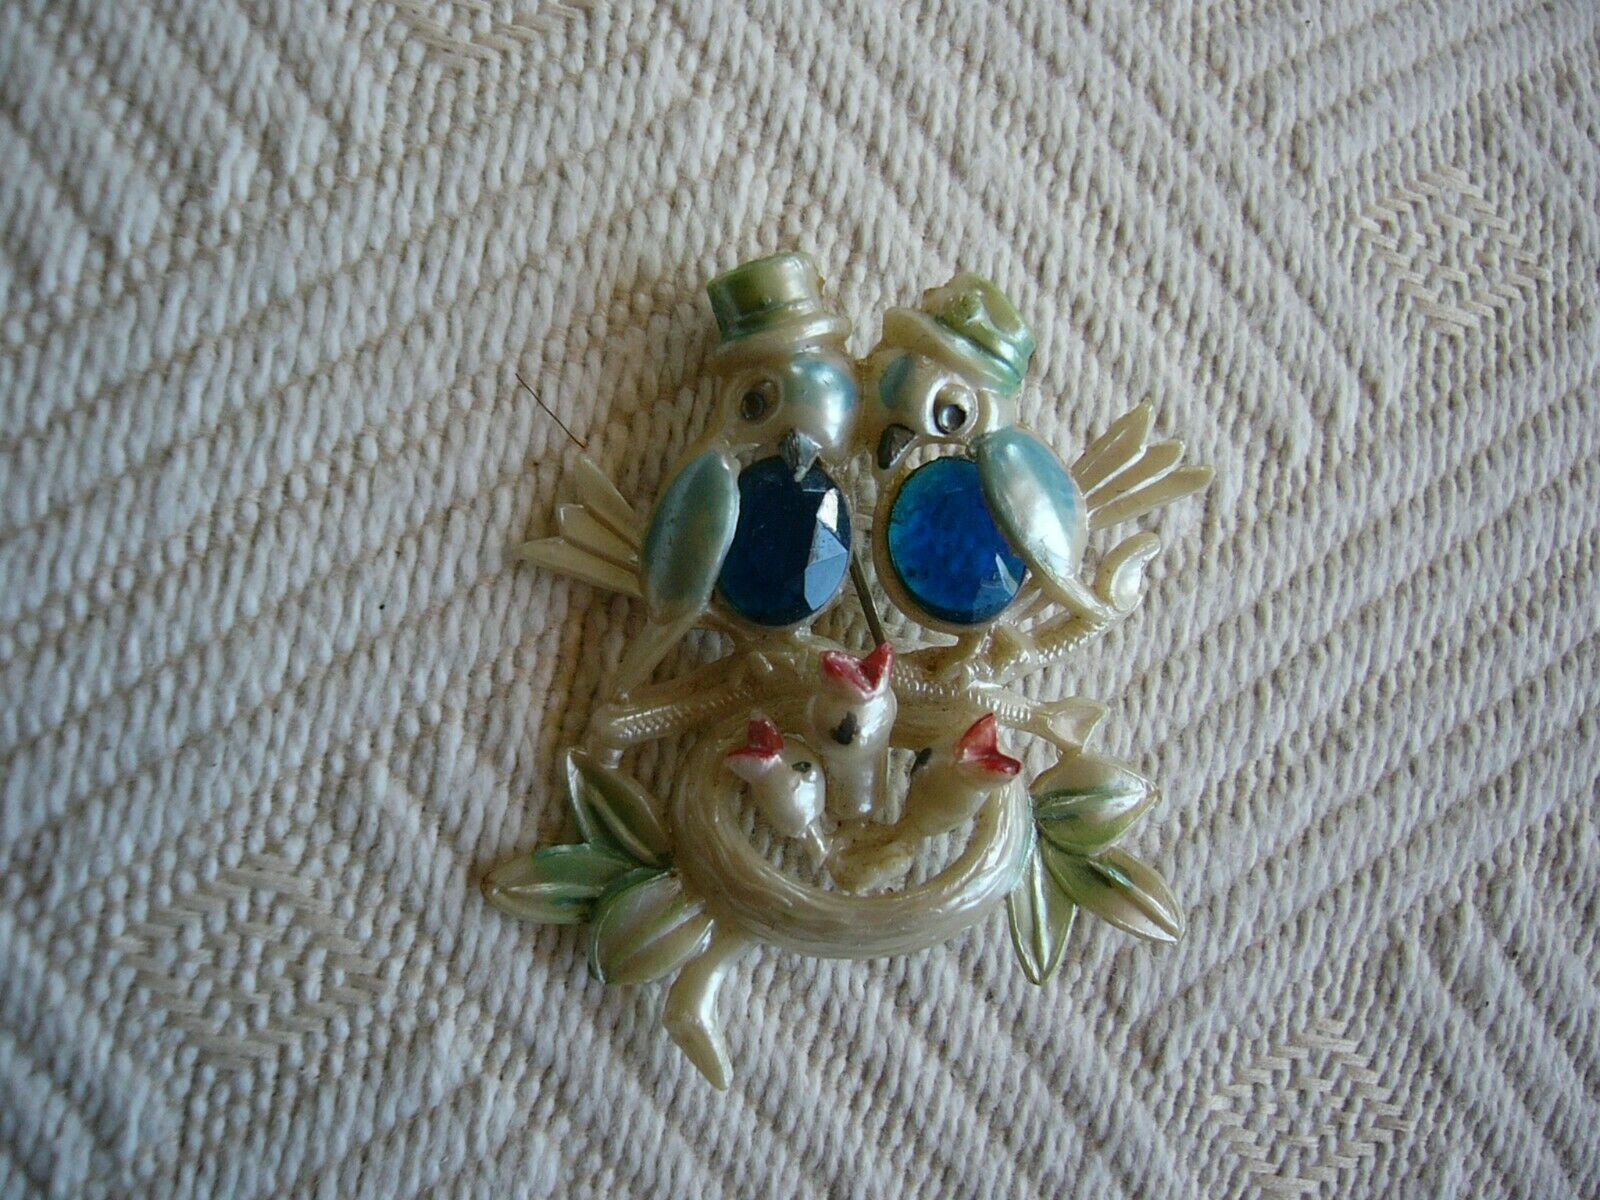 Vintage 1940's Craved Celluloid  Bakelite? Ma Pa & Nest Of Baby Birds Brooch Pin